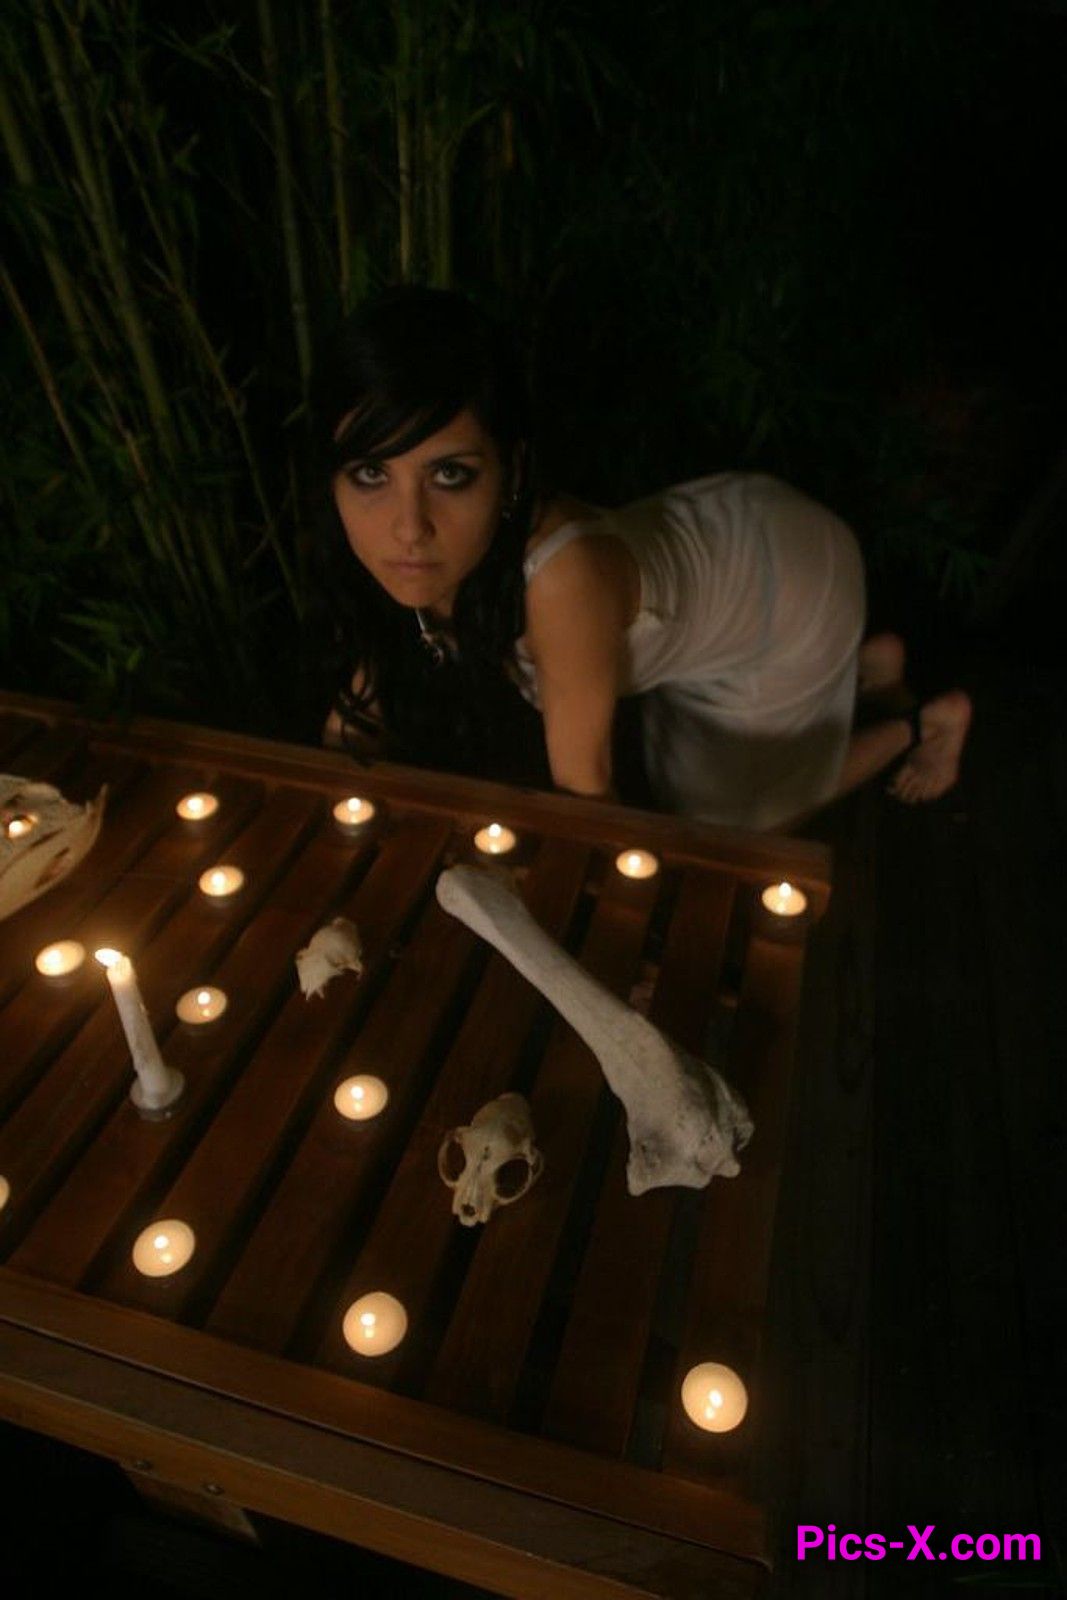 Dark haired gothic babe in a steamy candle lit hot tub - Punk Rock Girlfriend - Image 1